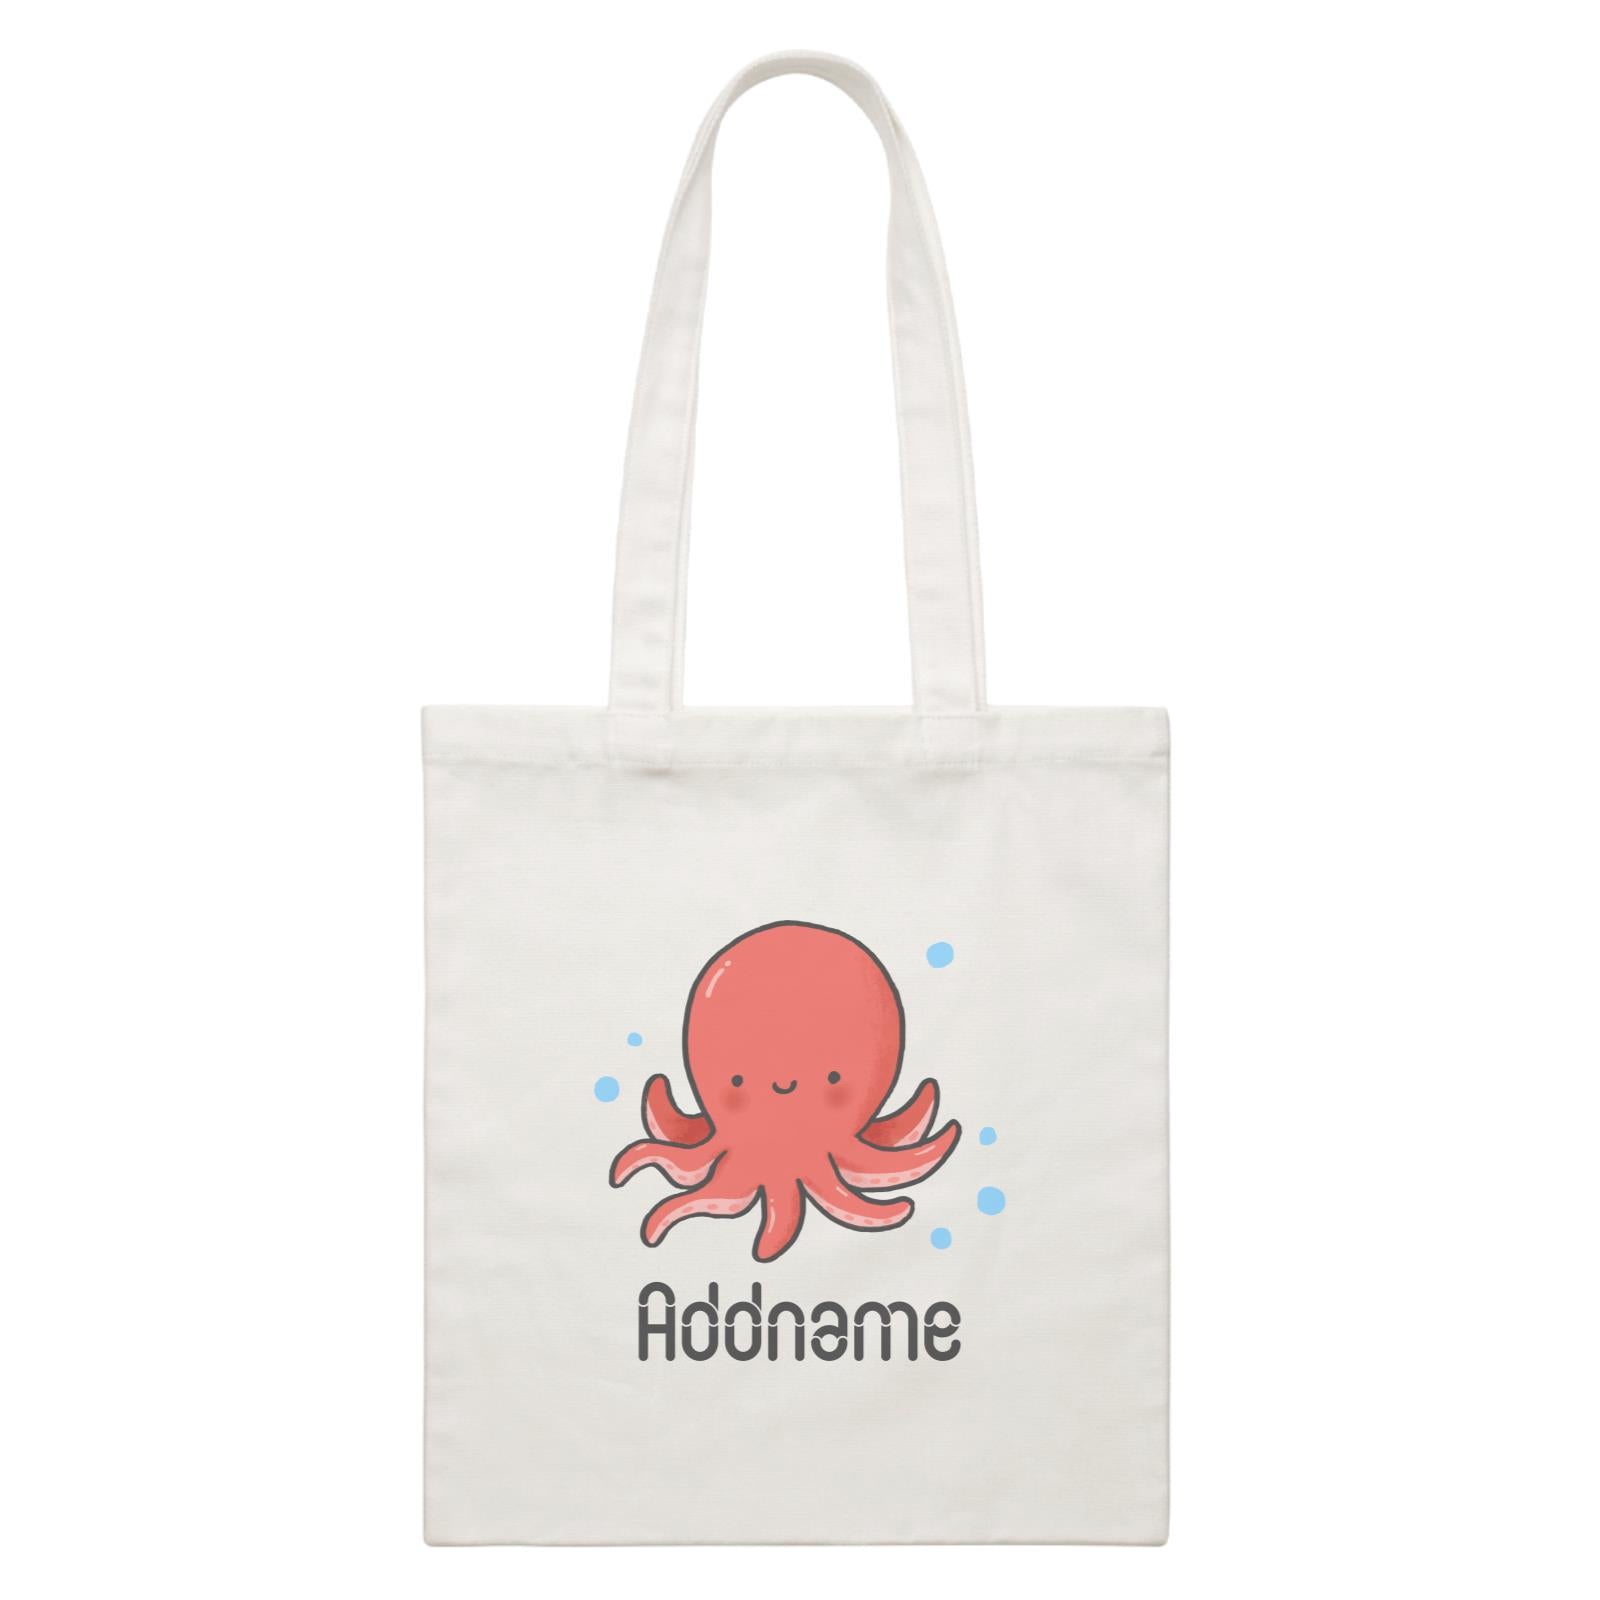 Cute Hand Drawn Style Octopus Addname White Canvas Bag